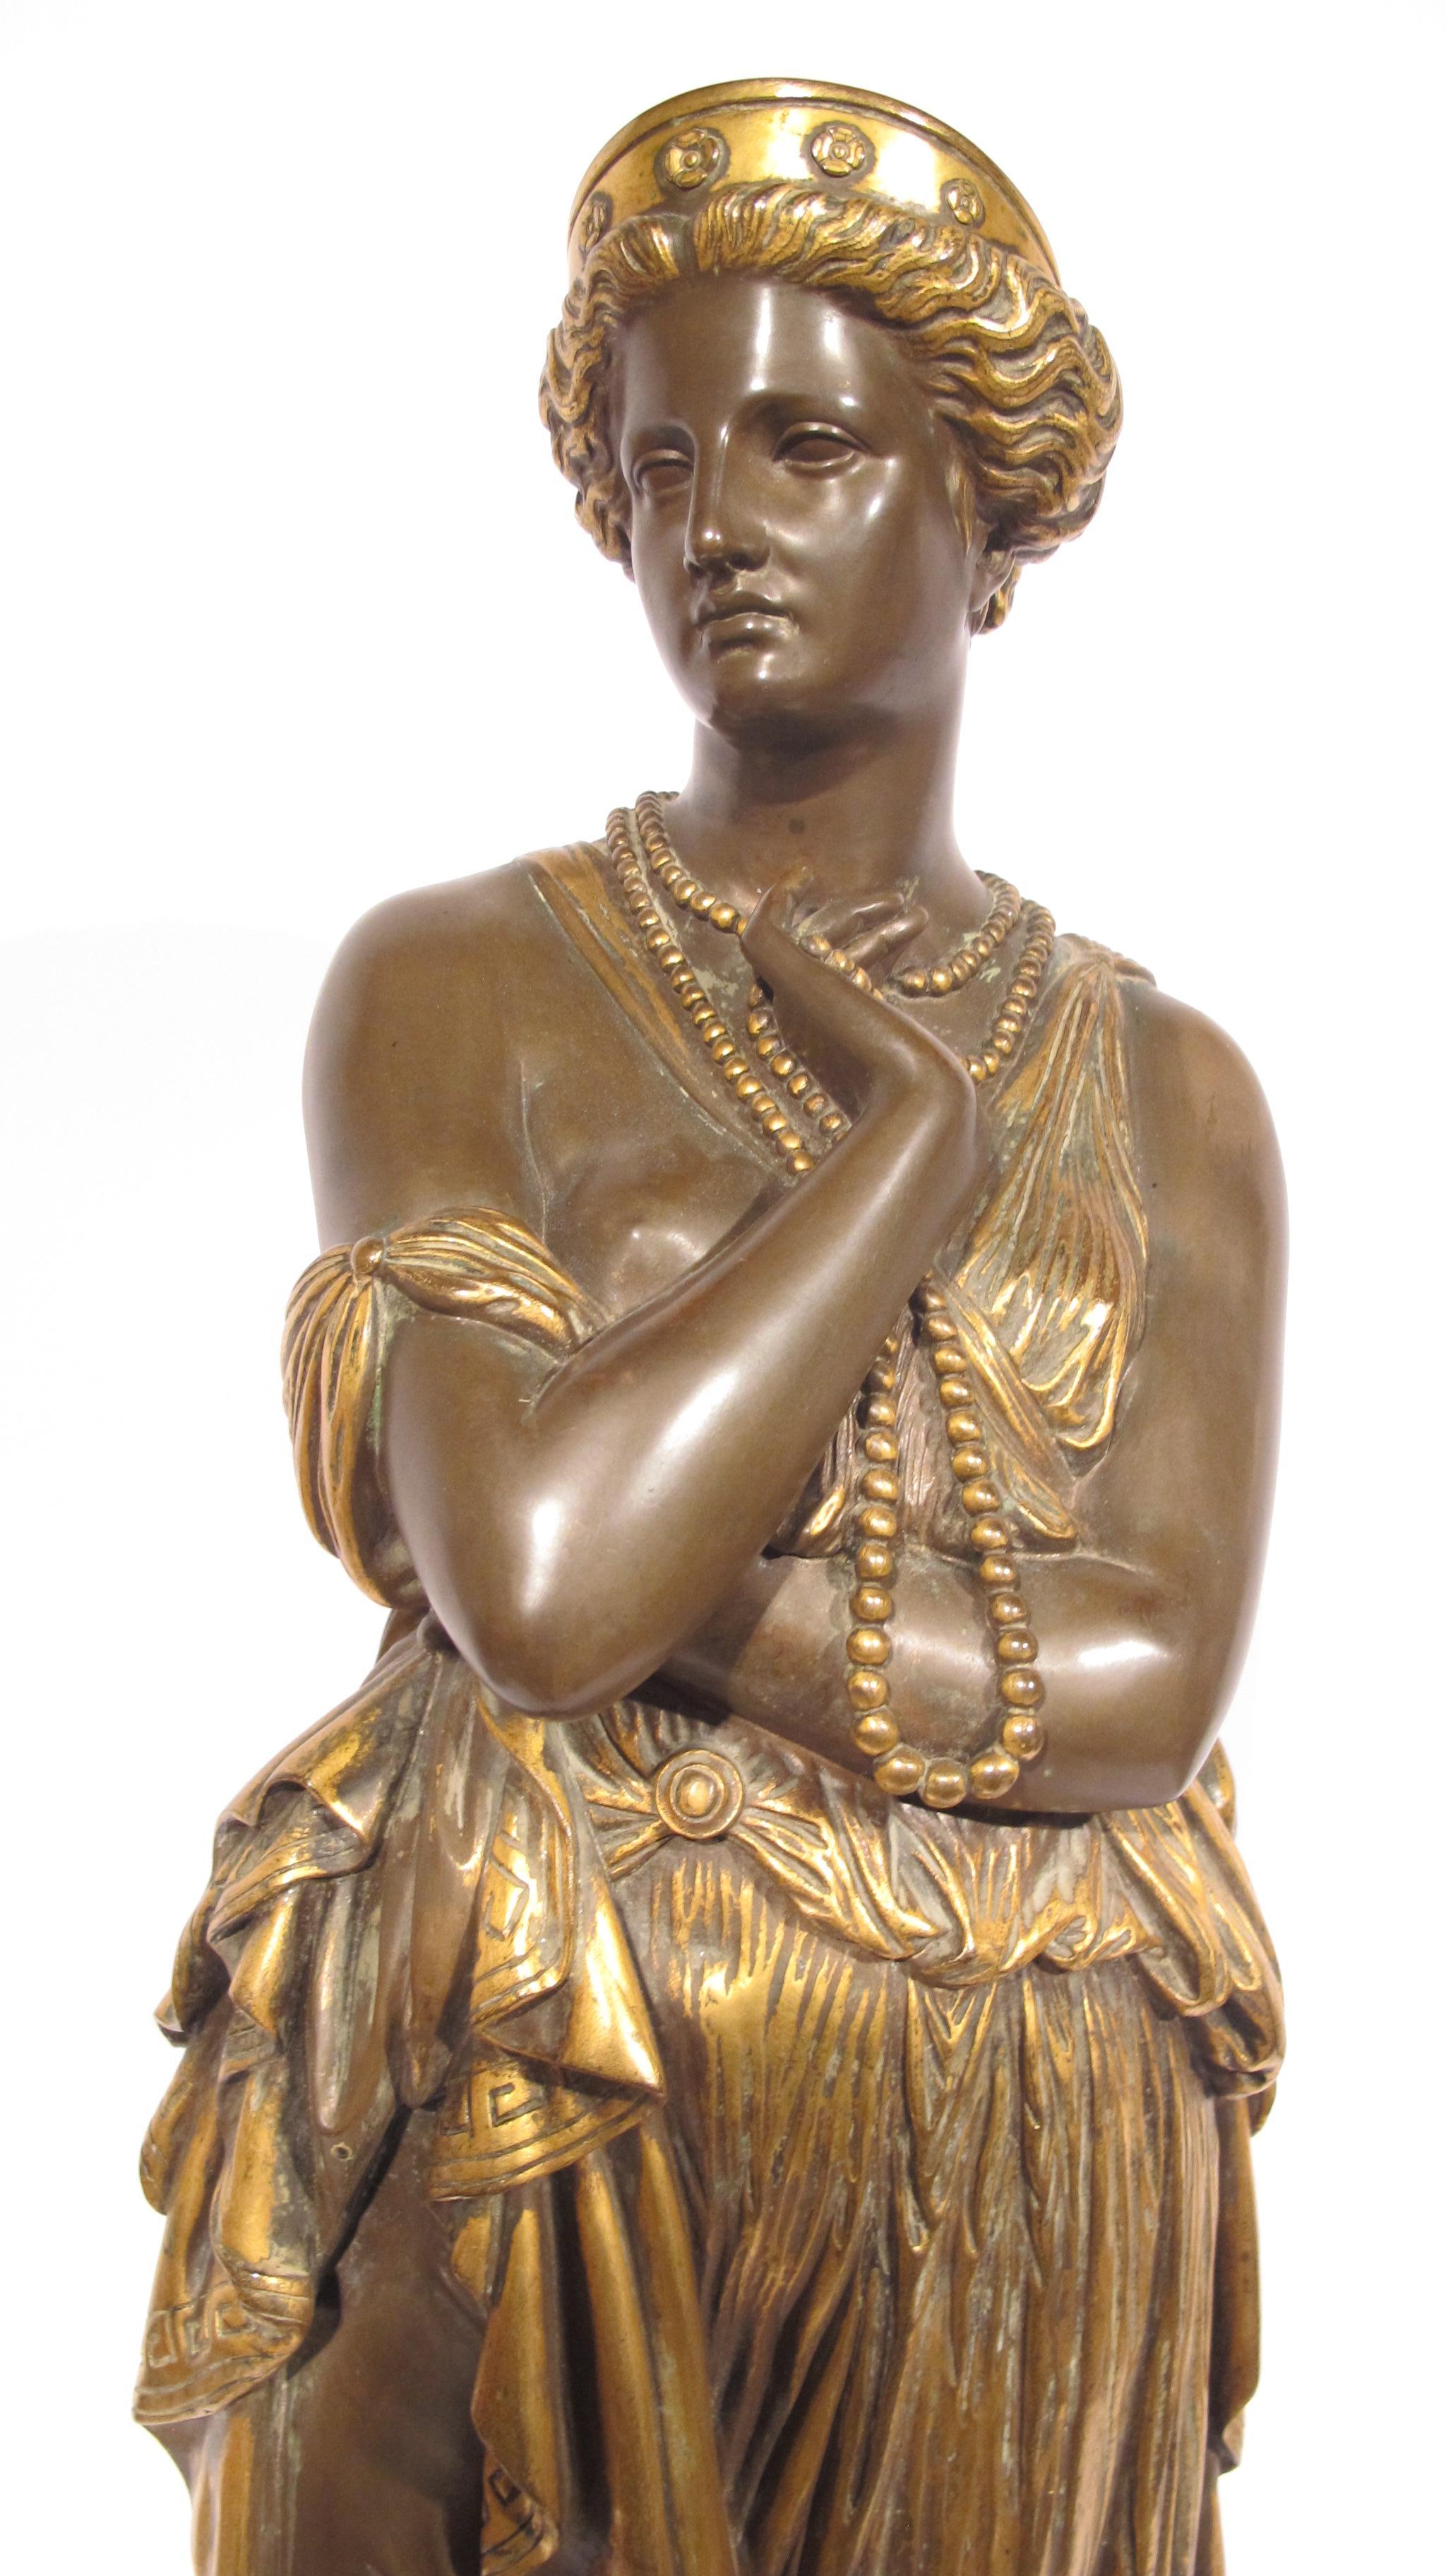 Bronze sculpture with a medal patina and gilding representing Helen of Troy, signed J.Clésinger with founder's stamp 